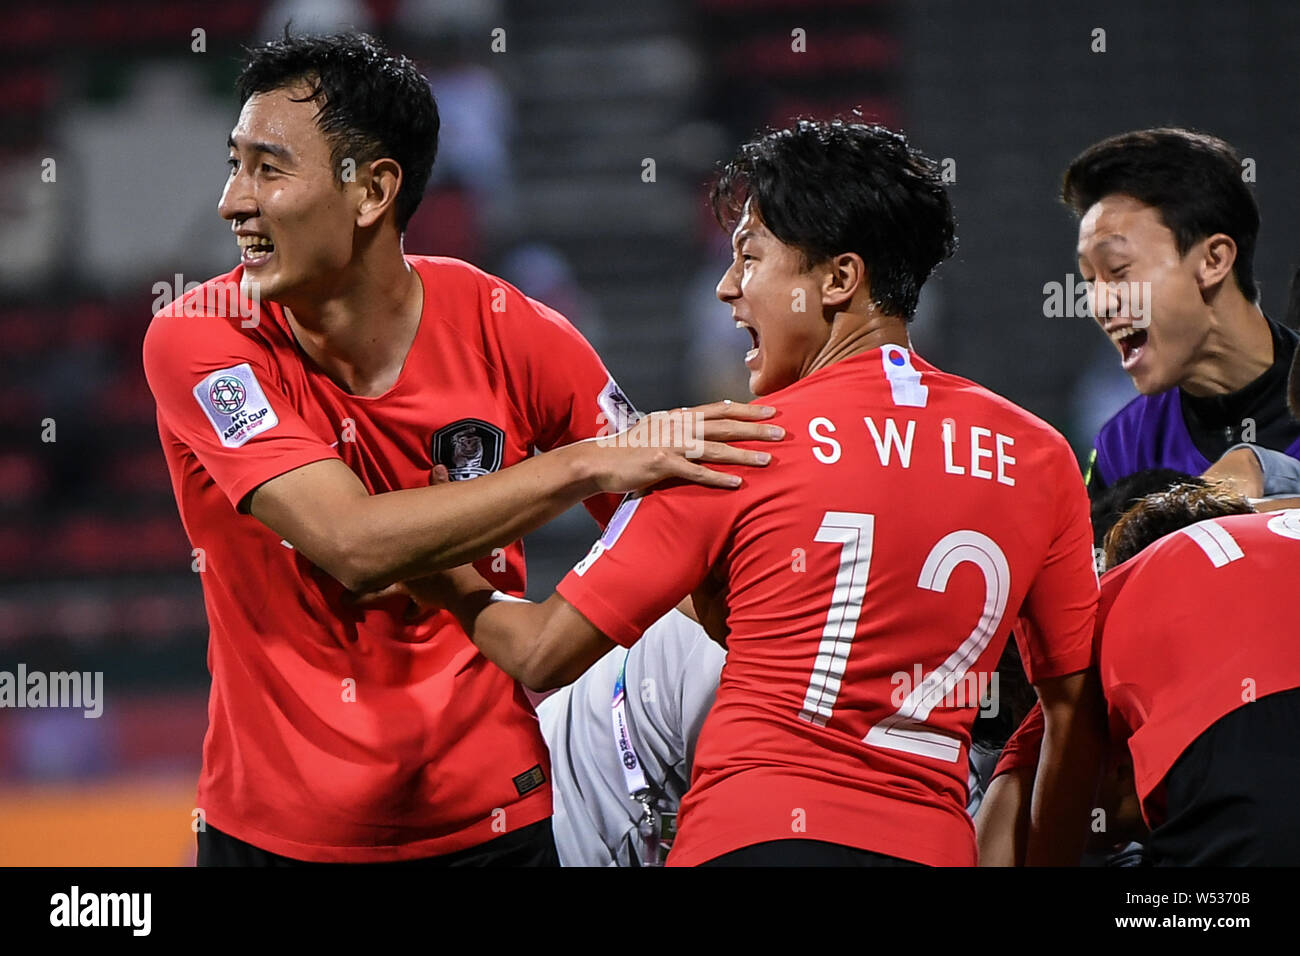 Ji Dong-won, left, and Lee Seung-woo of South Korea celebrate after soring a goal against Bahrain in the round of 16 match between South Korea and Bah Stock Photo